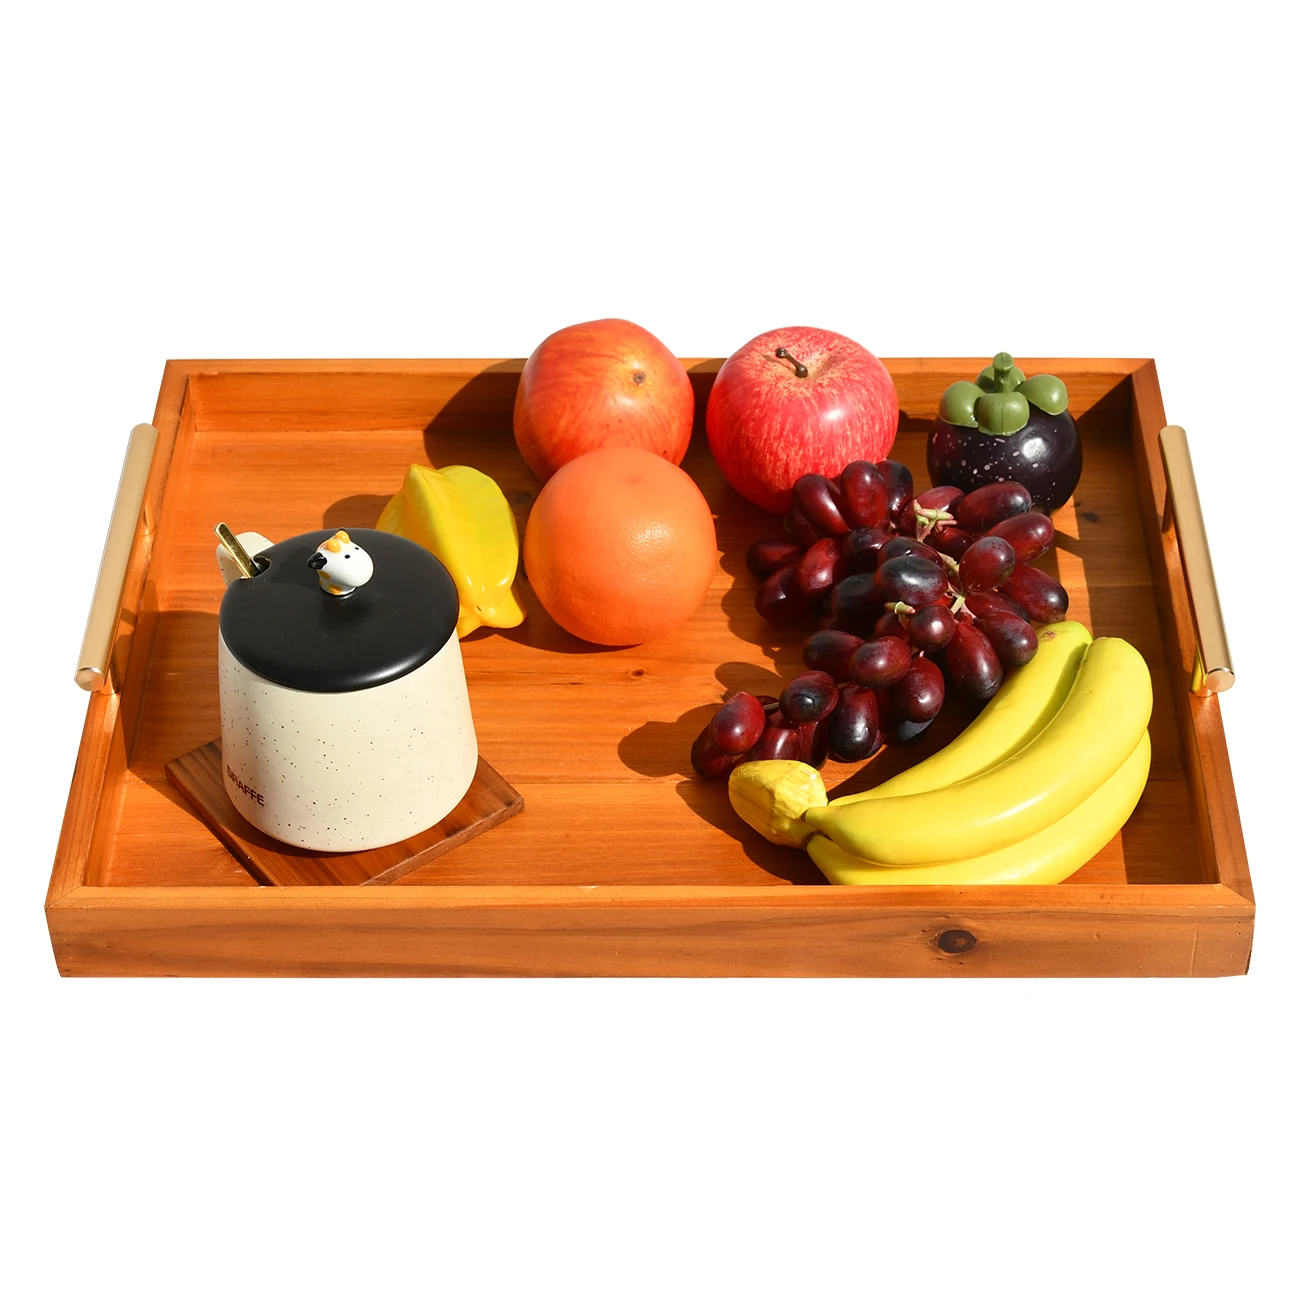 New Manufacturer Antique Style Bamboo Wooden Rectangle Breakfast Serving Tray With Handles Great For Dinner Trays